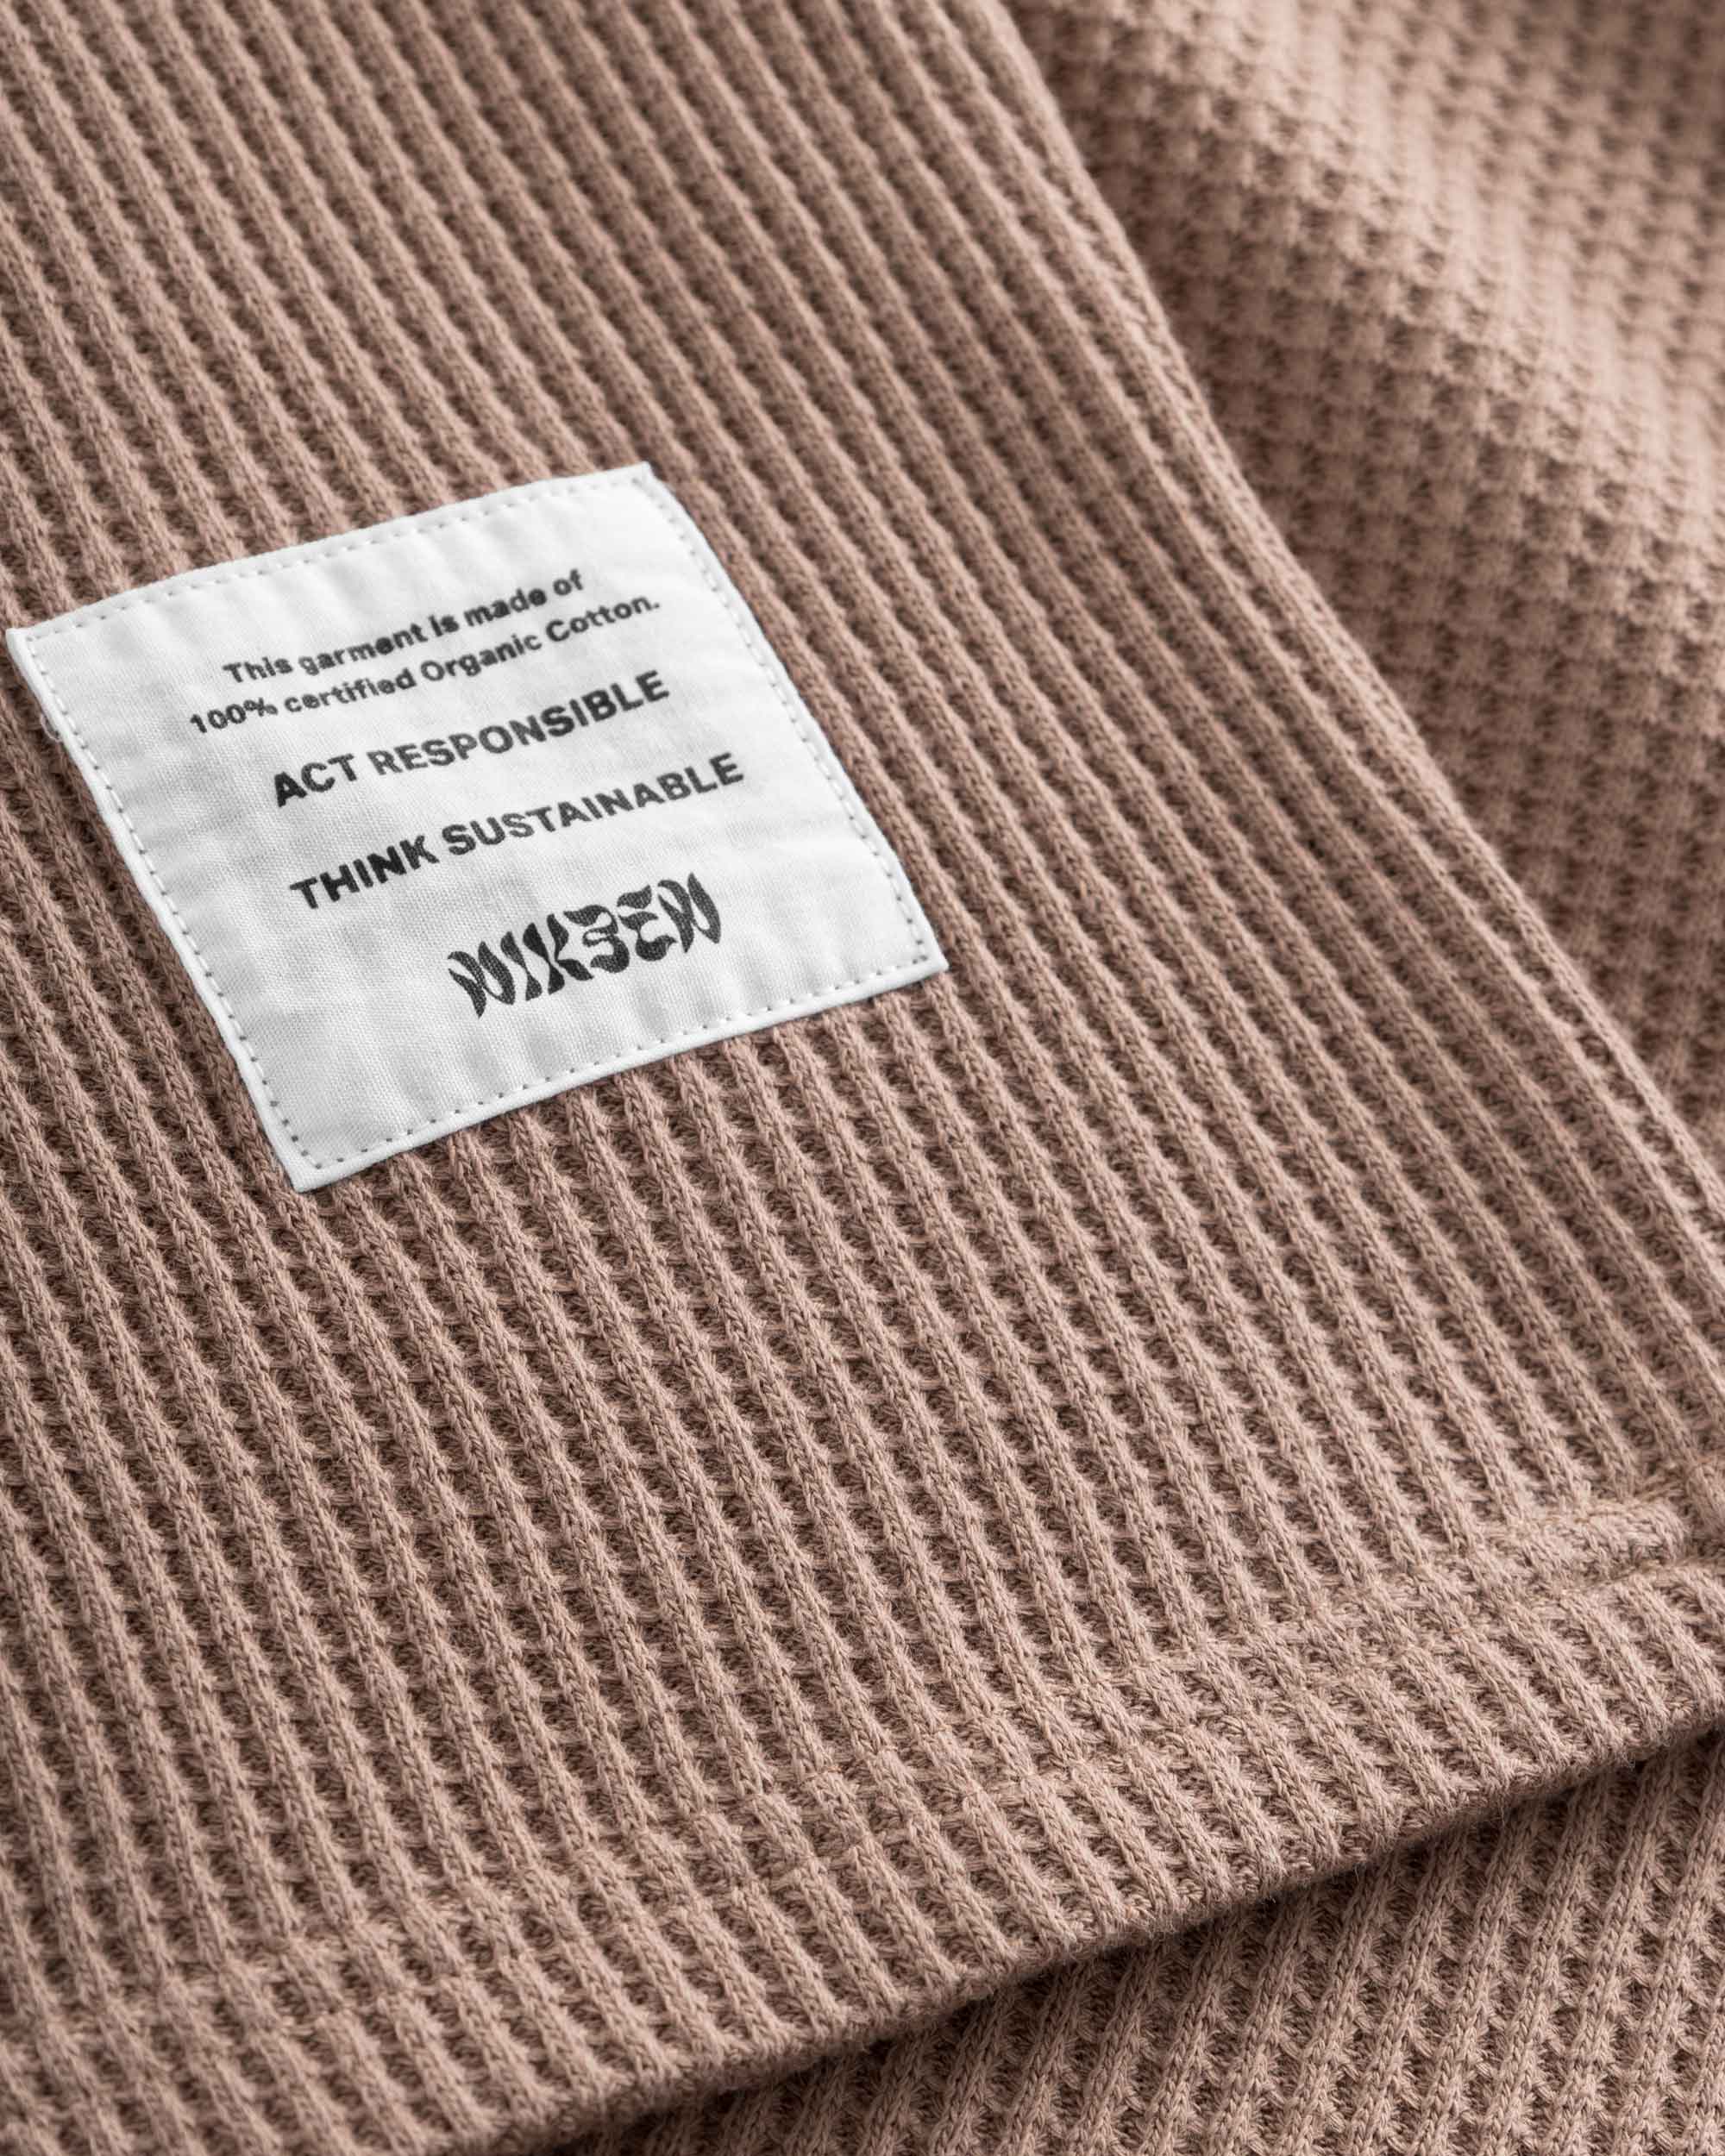 Close-up on a stitched-on material label on a brown waffle-patterned sweatshirt.